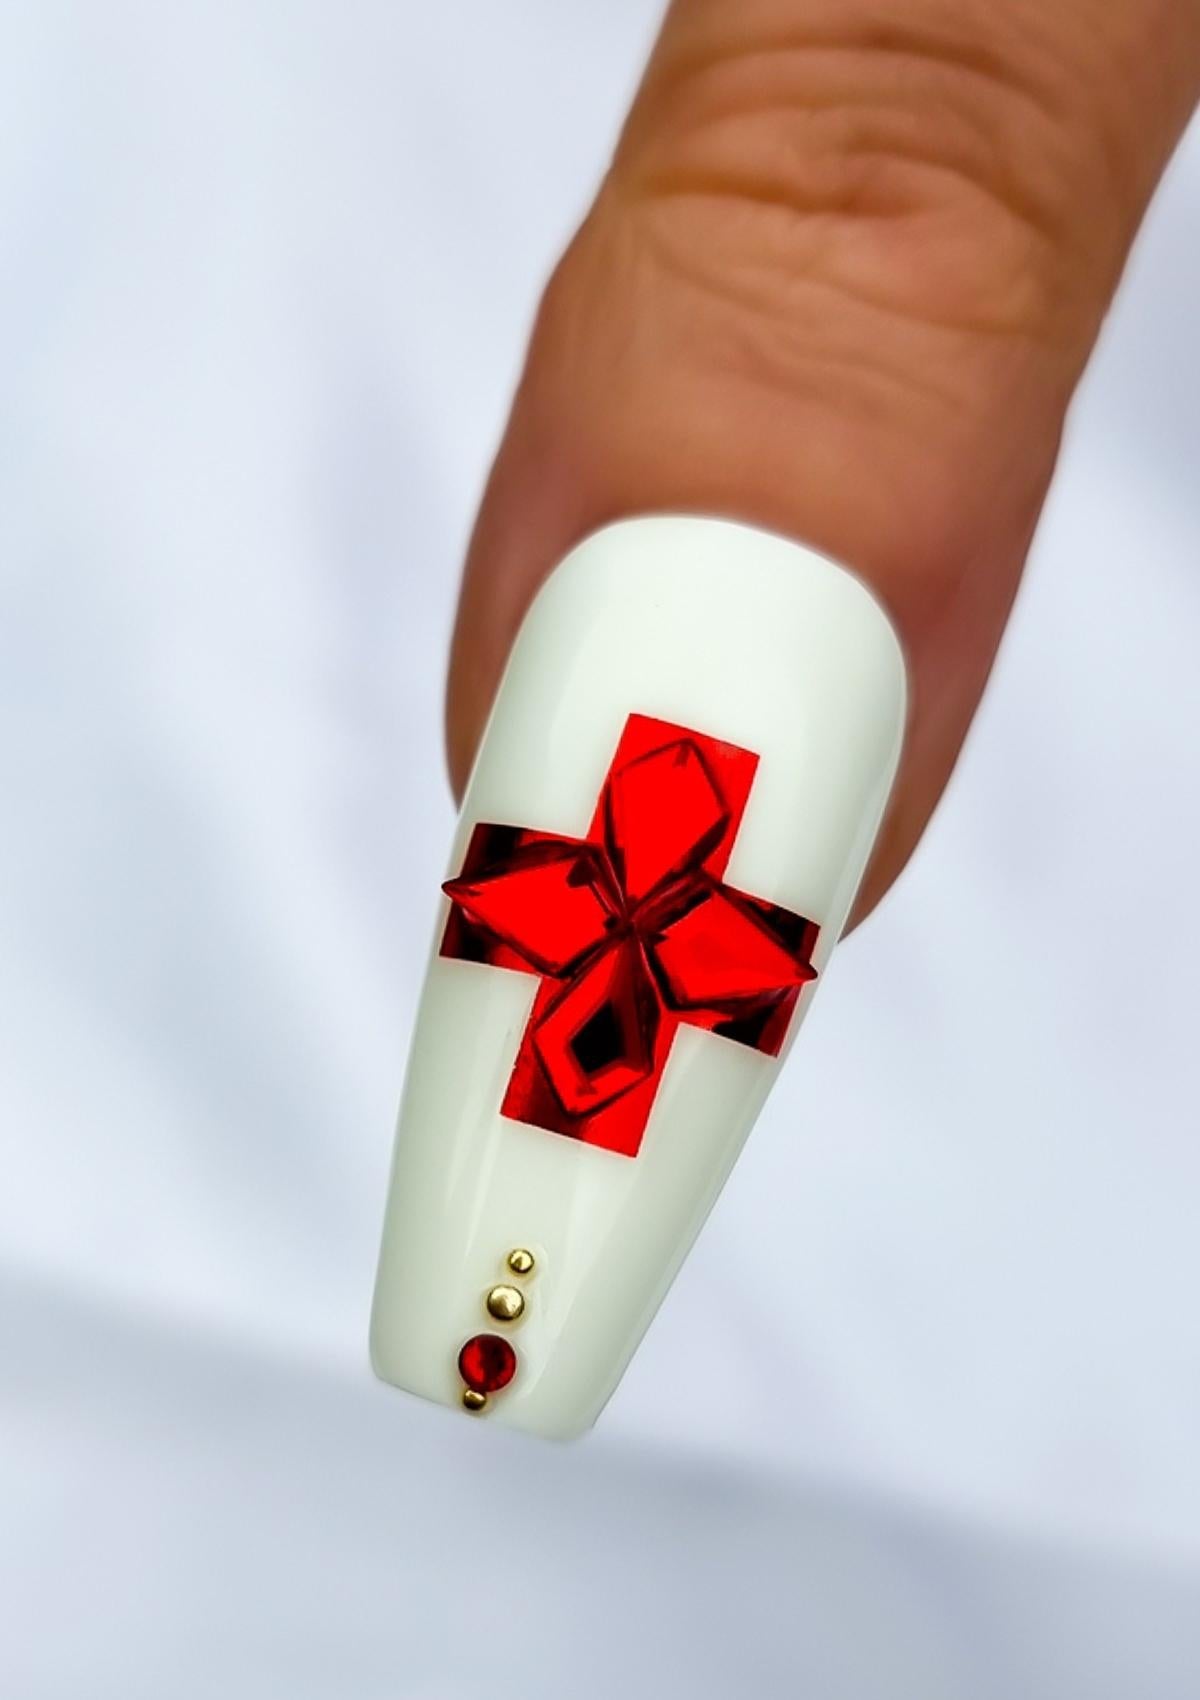 White thumb nail with red cross from Kingdom of Tonga flag with red crystals inside. 